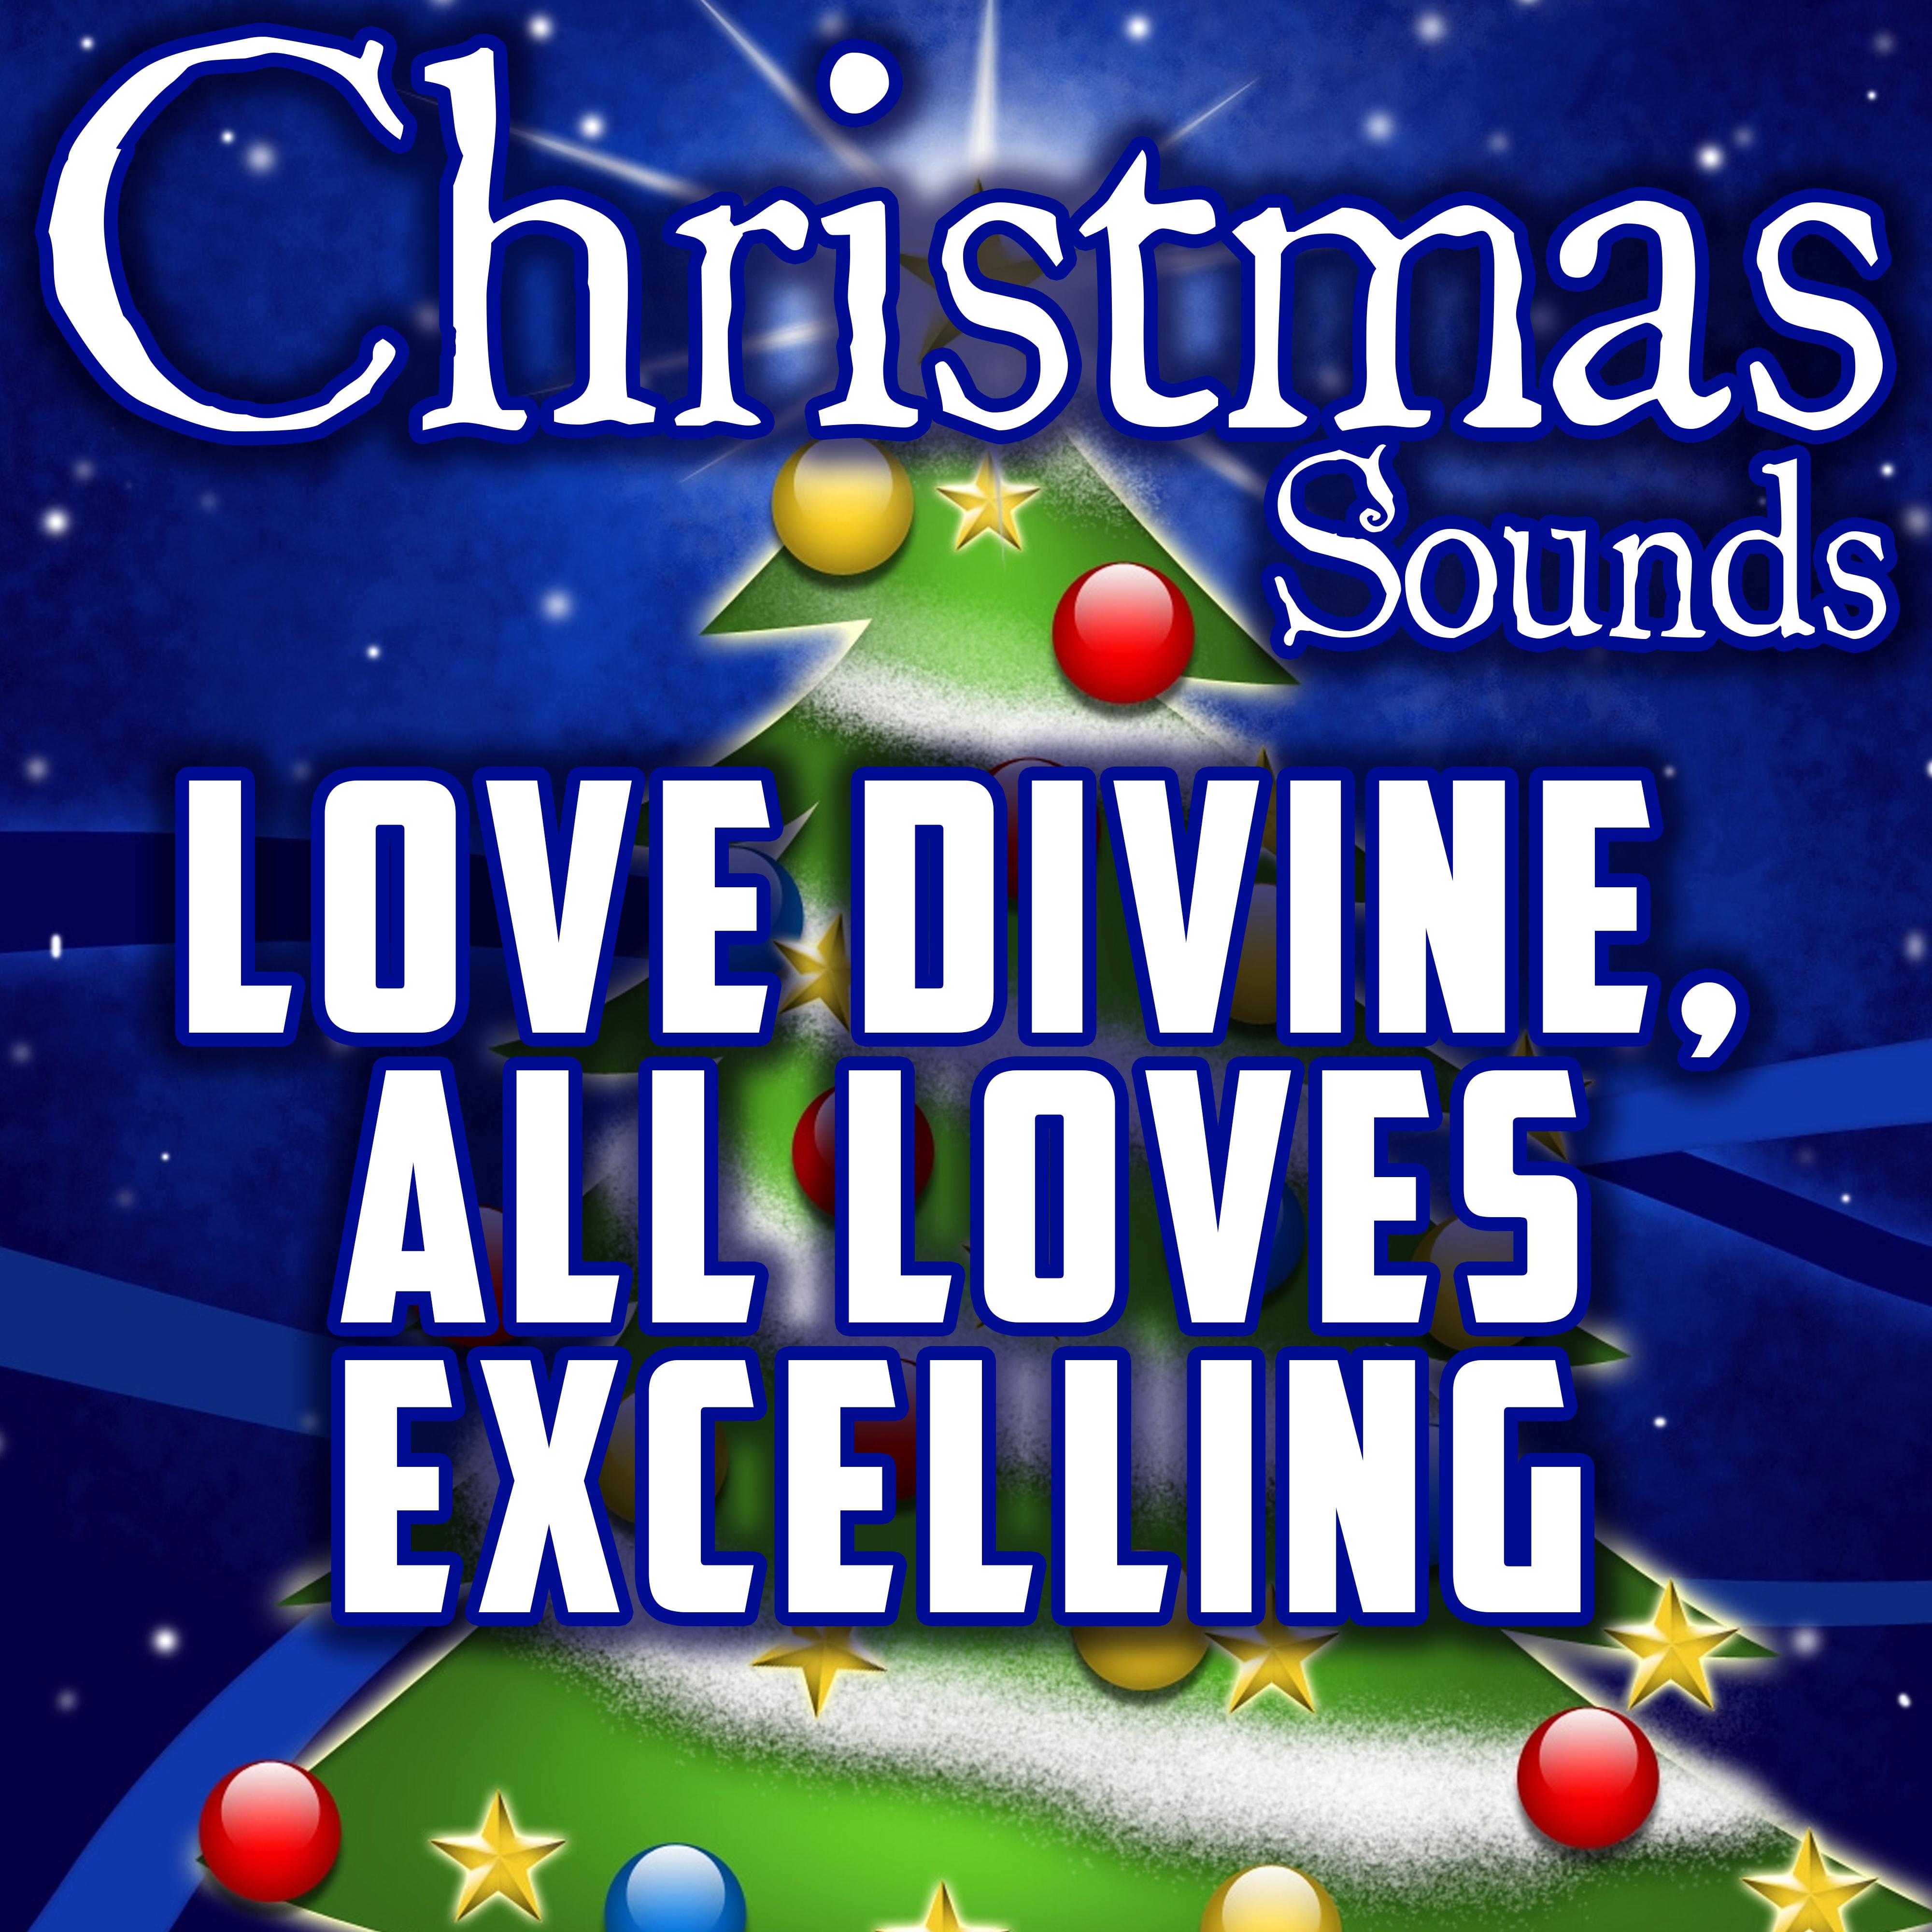 Love Divine, All Loves Excelling